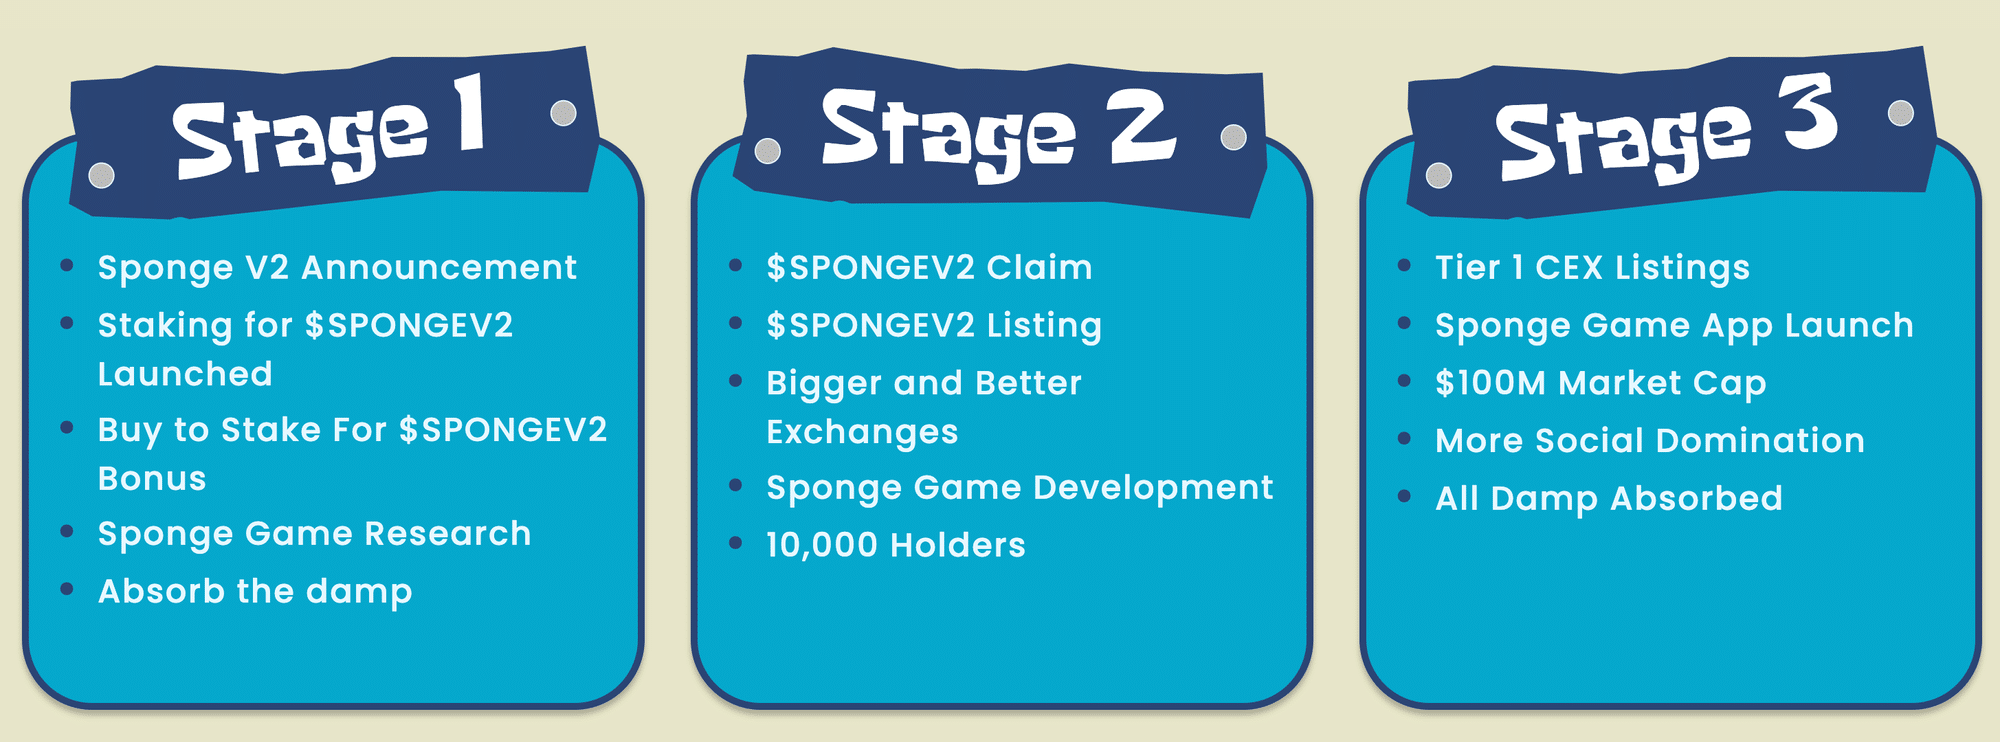  Sponge V2, the latest iteration of the renowned Sponge ($SPONGE) meme coin, is making waves in the cryptocurrency market. Following the phenomenal success of Sponge V1, which peaked at nearly $100 million in market cap and amassed over 13,000 holders, Sponge V2 arrives with promising innovations and opportunities for investors. How to Acquire Sponge V2 LEIA Price Analysis: As Leia token hammers a skyrocketing all-time high, could illiquidity and retracement risk crash this Solana Memecoin? Acquiring Sponge V2 is unique: Stake Sponge V1: Buy and stake V1 tokens via Sponge.vip or stake your existing V1 tokens. Earn More V2: The longer and more V1 tokens you stake, the more V2 tokens you earn. Read more: Best Crypto to Invest In 2024 Staking Mechanics and P2E Integration Sponge V2 introduces Play-to-Earn (P2E) utility, enhancing its ecosystem. Stake your V1 tokens to earn V2, and engage in the upcoming P2E game to earn additional $SPONGEV2 tokens. Moreover, this P2E game, a new utility in the Sponge ecosystem, will feature both free and paid versions for enhanced gaming and earning experiences. Unique Aspects of Sponge V2 Over PINKY Price Analysis Exclusive Access: Earn $SPONGEV2 exclusively through $SPONGE staking. Bonus Rewards: Buying and staking $SPONGE offers special $SPONGEV2 bonuses. Passive Earnings: Staked $SPONGE tokens yield passive rewards, starting at a minimum 40% APY. Permanent Transition: Staking V1 tokens will result in their permanent locking, shifting the focus to V2 post-launch. Roadmap and Future Prospects Sponge V2’s roadmap is ambitious, targeting 10,000 holders, Tier 1 CEX listings, and a $100M market cap. The launch stages include the Sponge game’s development and the Sponge V2 claim and listing. Sponge V2 is not just a sequel to its predecessor; it’s a reinvention with a focus on utility and community engagement. The integration of P2E and exclusive staking mechanisms make it a standout project in the meme coin domain. Stay updated on Sponge V2’s journey through social channels and witness its growth in the crypto world. Get Sponge V2 Here